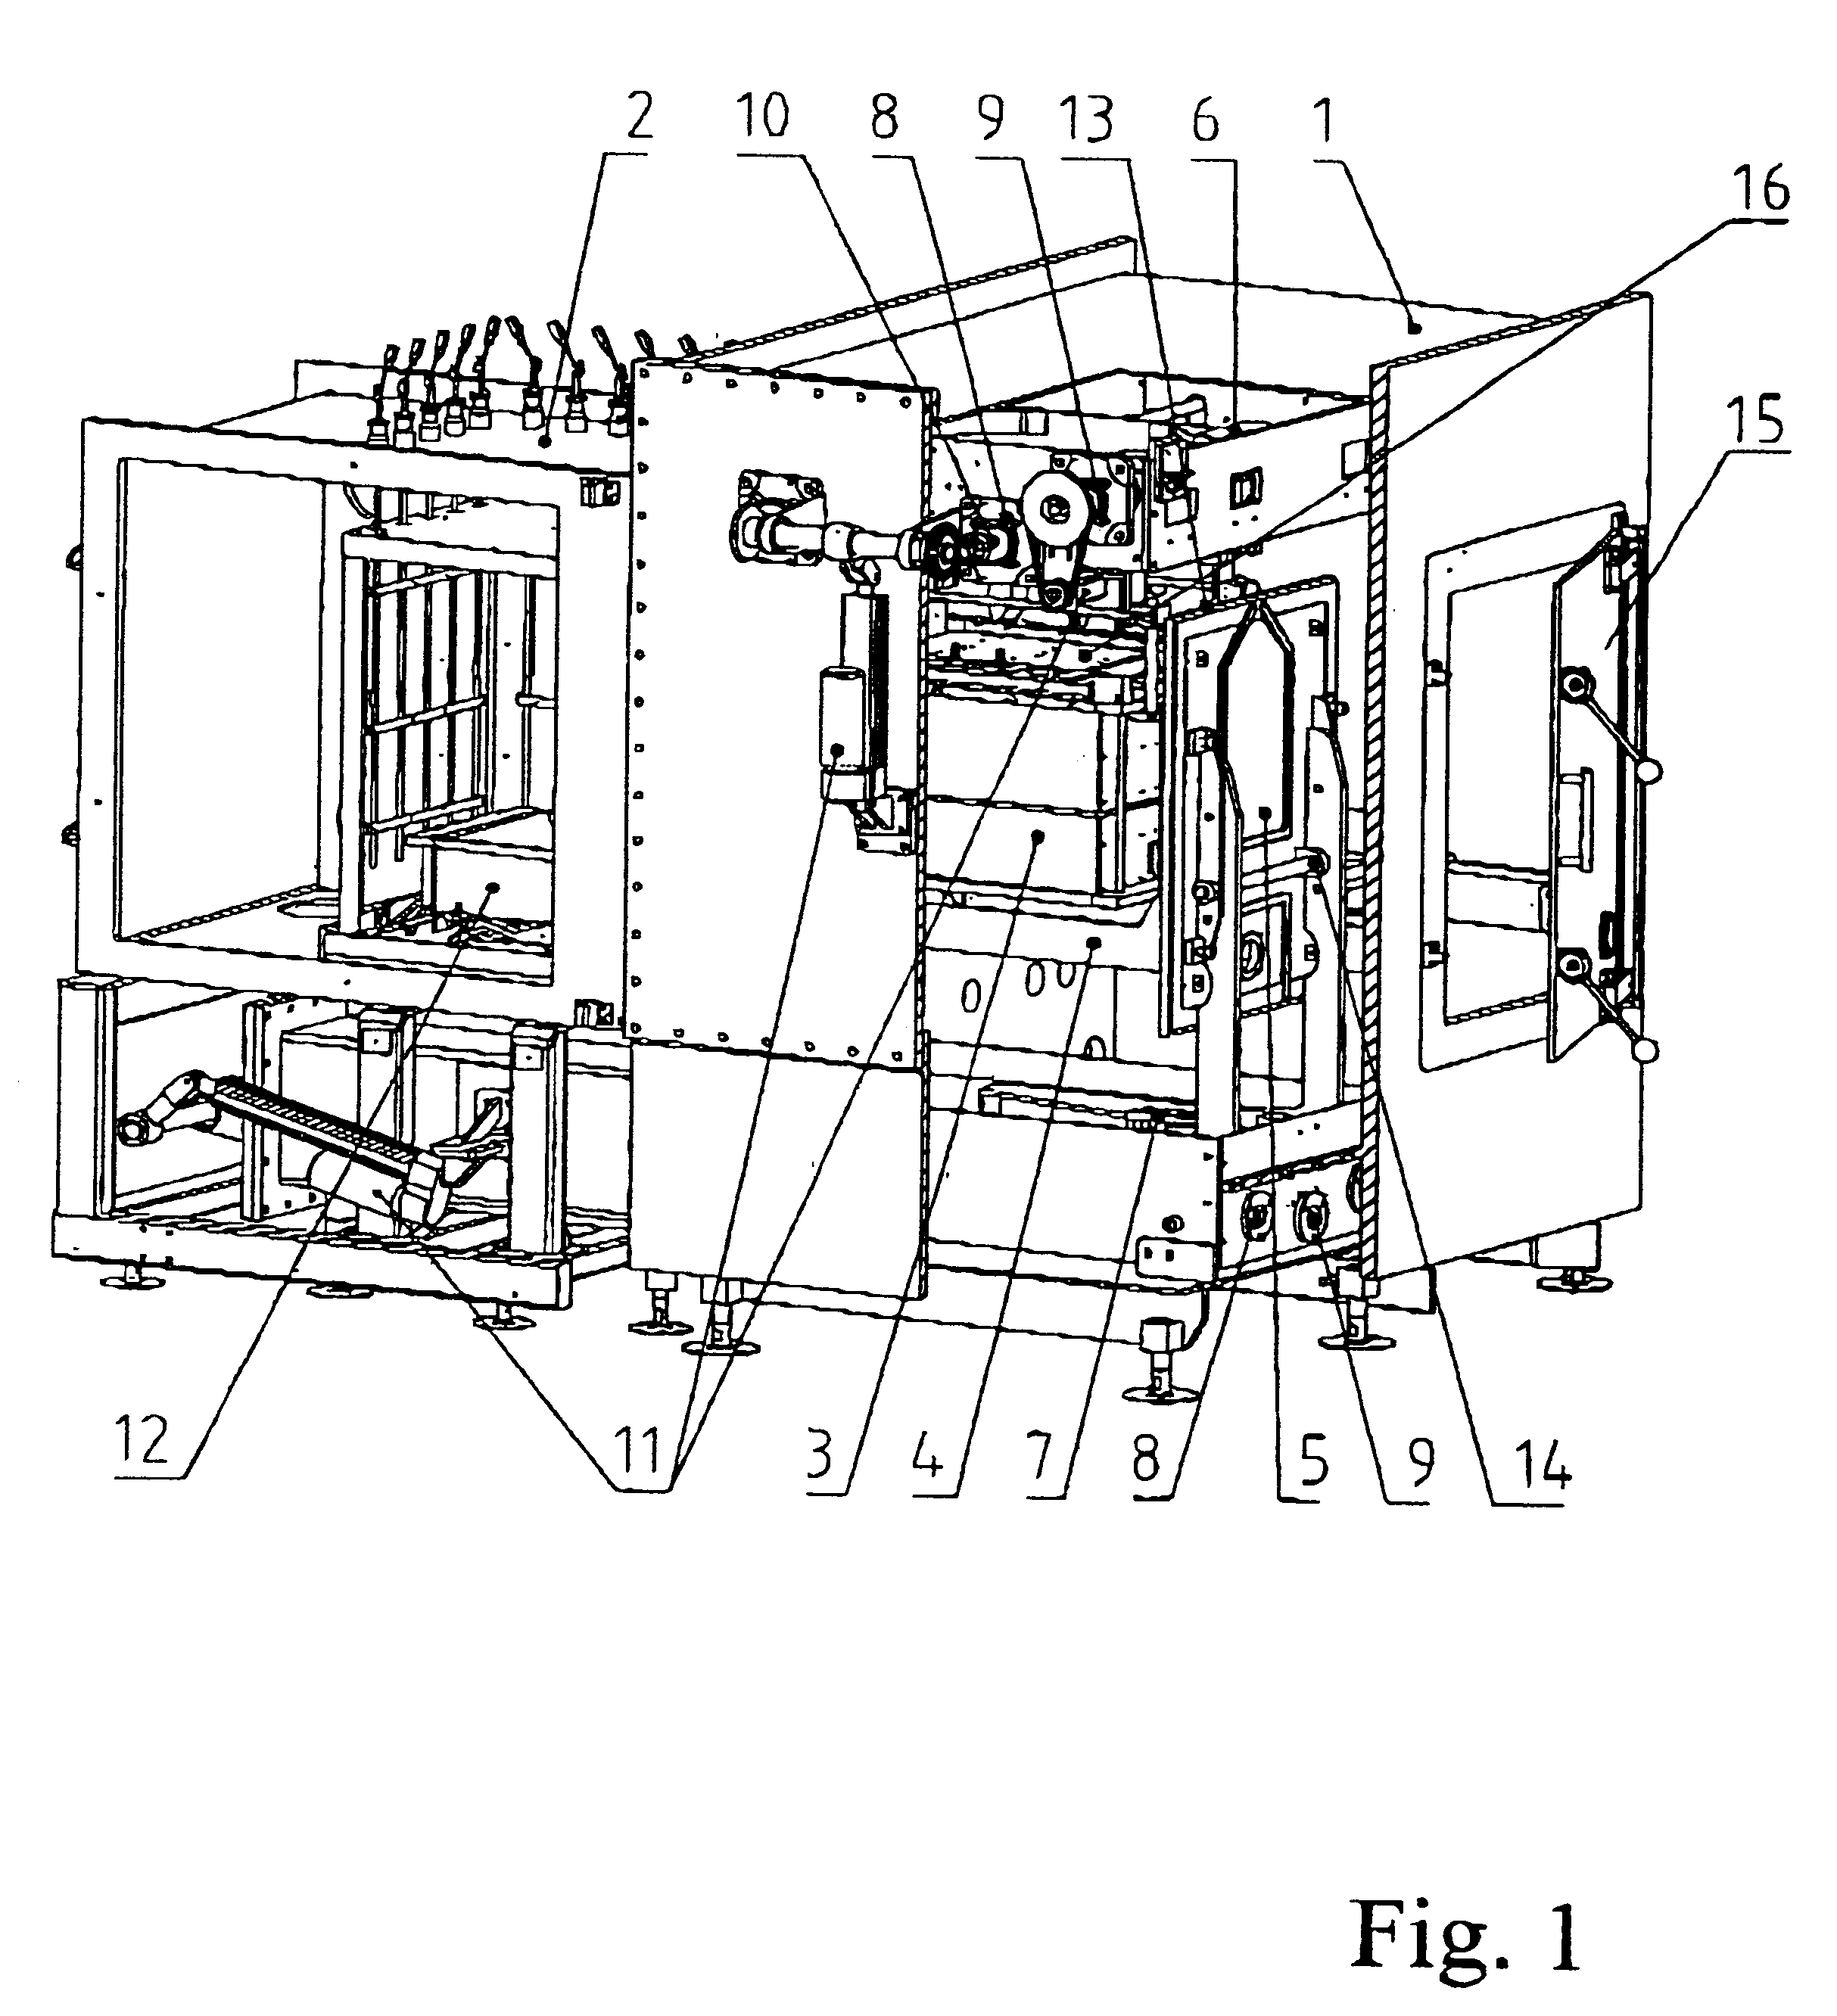 Apparatus for growing thin films